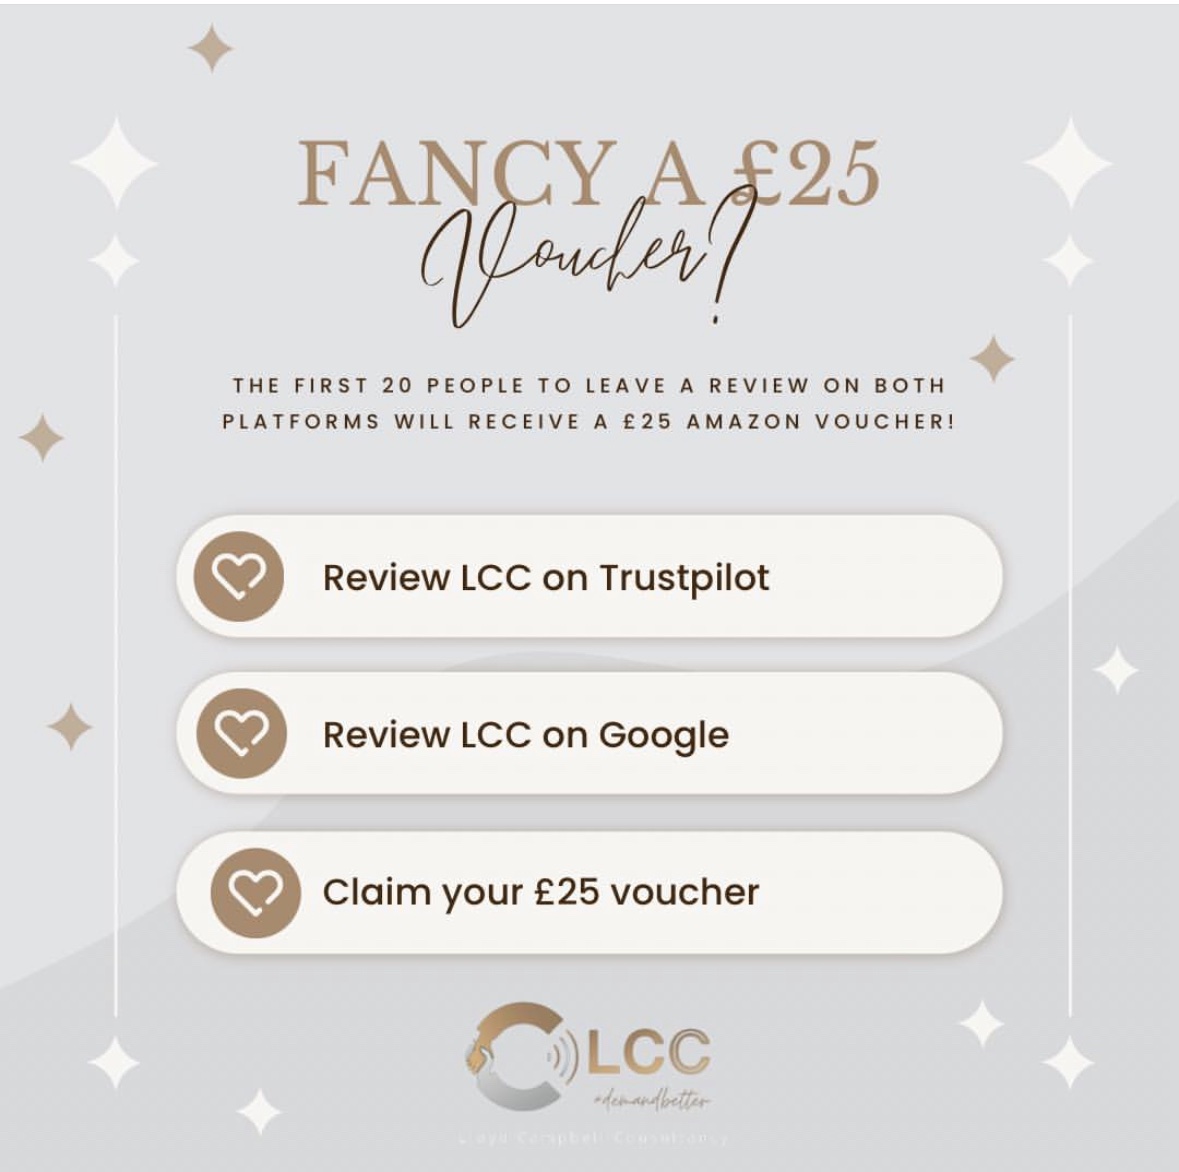 Who wants to bag a £25 Amazon voucher? 

Leave us a review on BOTH Trustpilot & Google, screenshot both of these to us and the voucher is yours! 

We’re only giving away 20 so be quick ⏱️ 

#lcccustomer #referralrewards #makingbusinessbetter #supportallbusiness  #GiveawayAlert